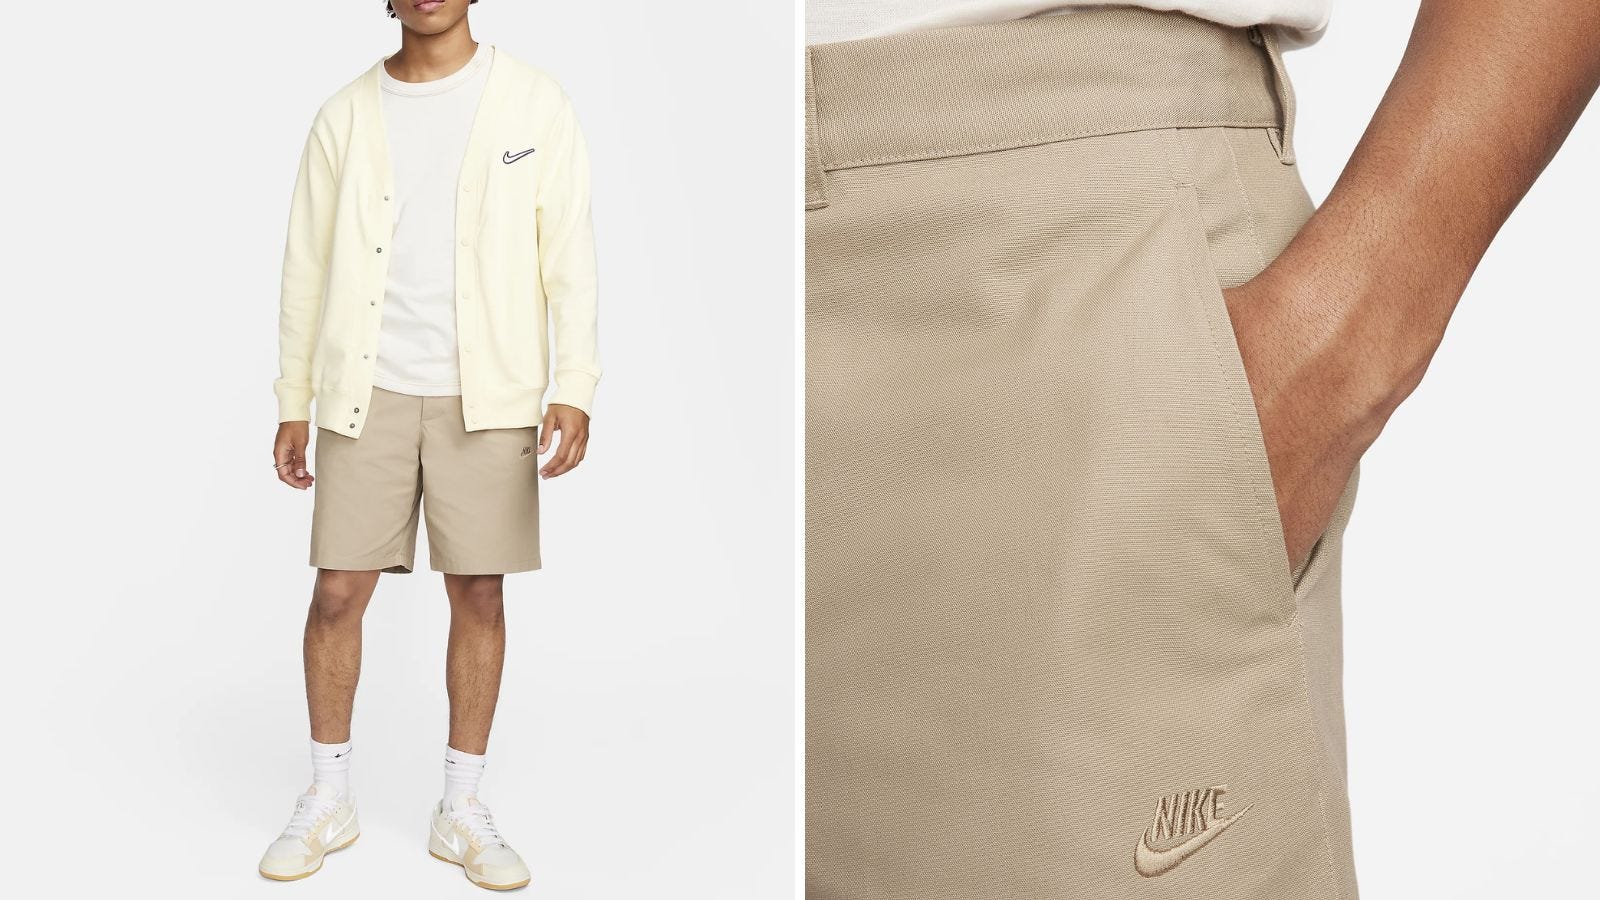 side by side images of a man wearing a pair of chino shorts and a cream-colored cardigan on the left. on the right, a close-up of the nike logo embroidered on the shorts, part of a roundup of Nike picks from PGA player Tony Finau